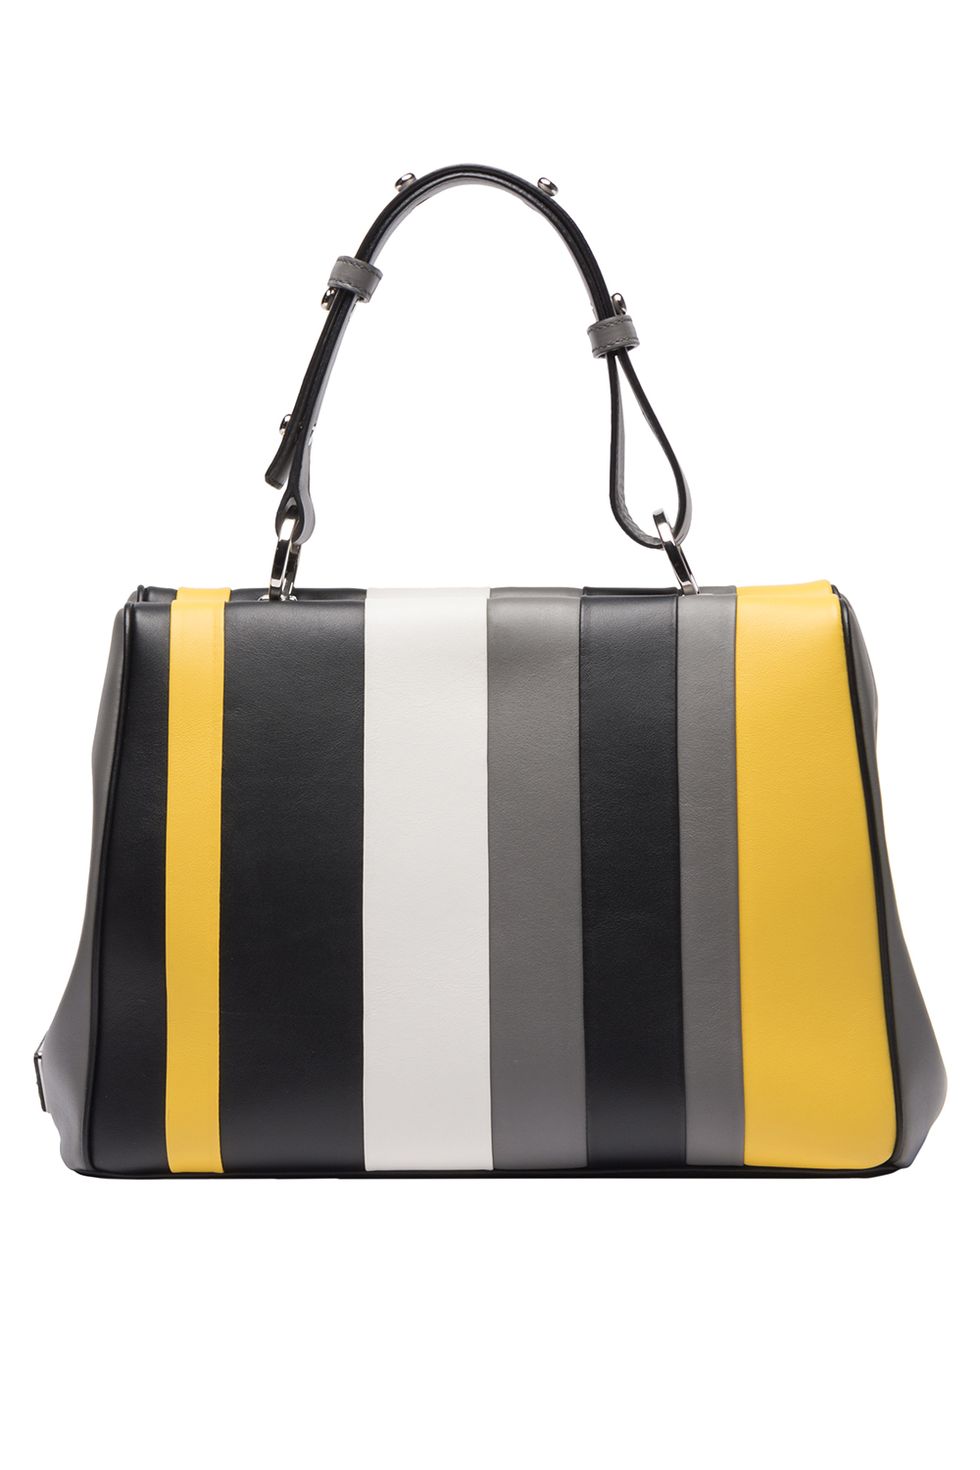 Product, Yellow, Bag, White, Style, Luggage and bags, Shoulder bag, Fashion, Black, Travel, 